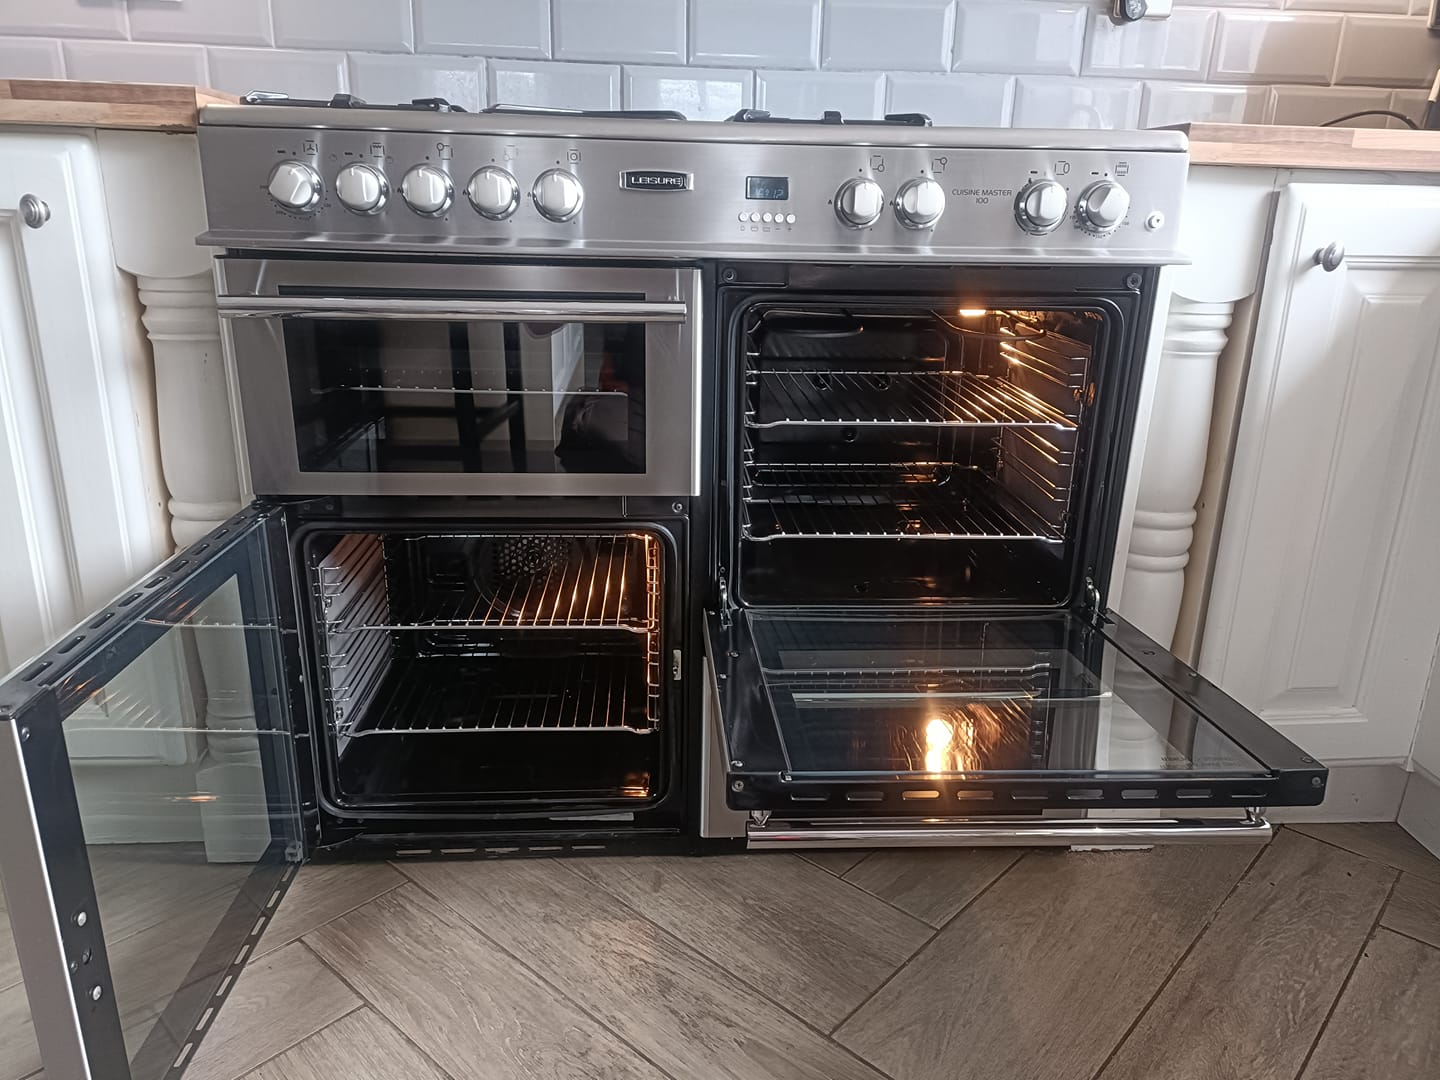 Oven Clean Co Down